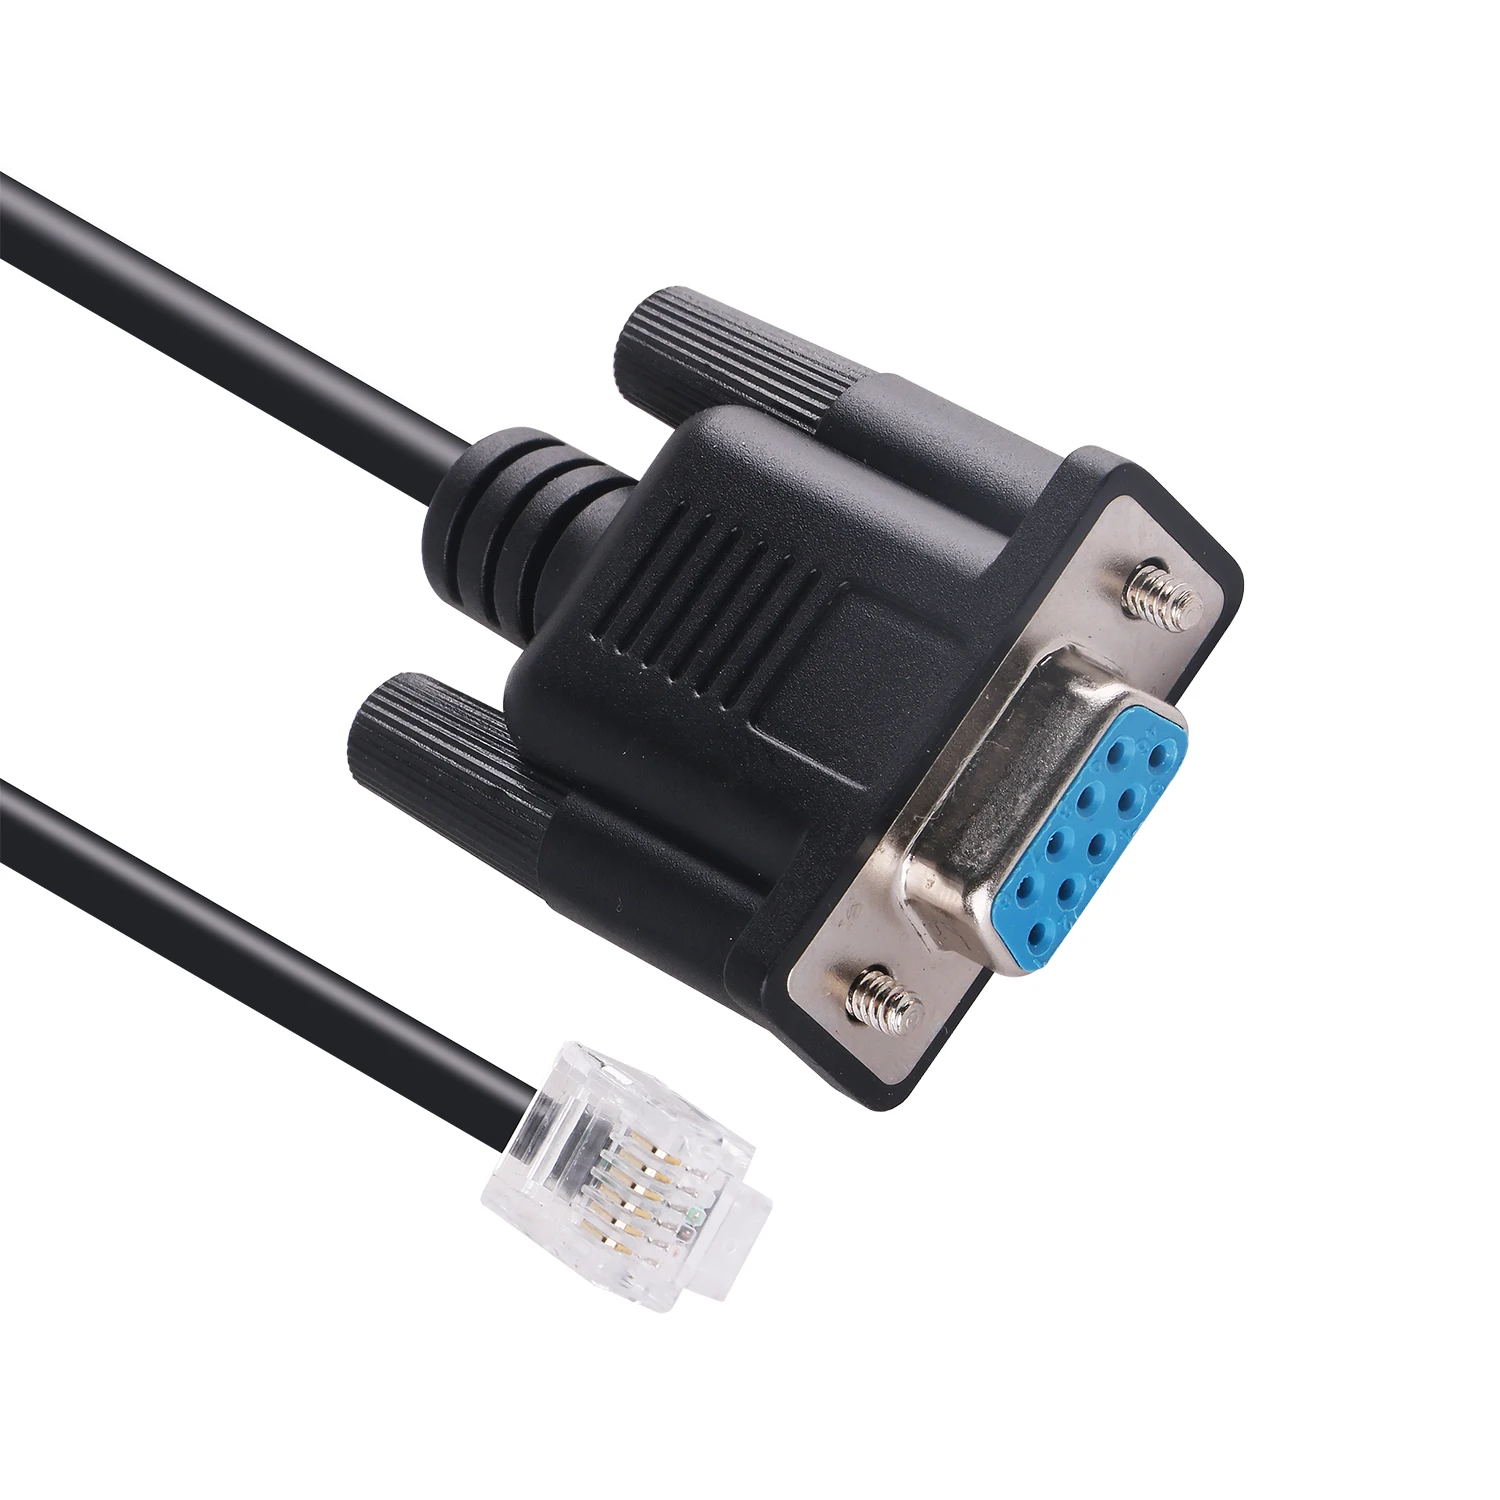 

DB9 Serial Cable for APC PDU 940-0144A ,RJ11 RJ12 6P6C RS232 Cable for APC Rack PDU